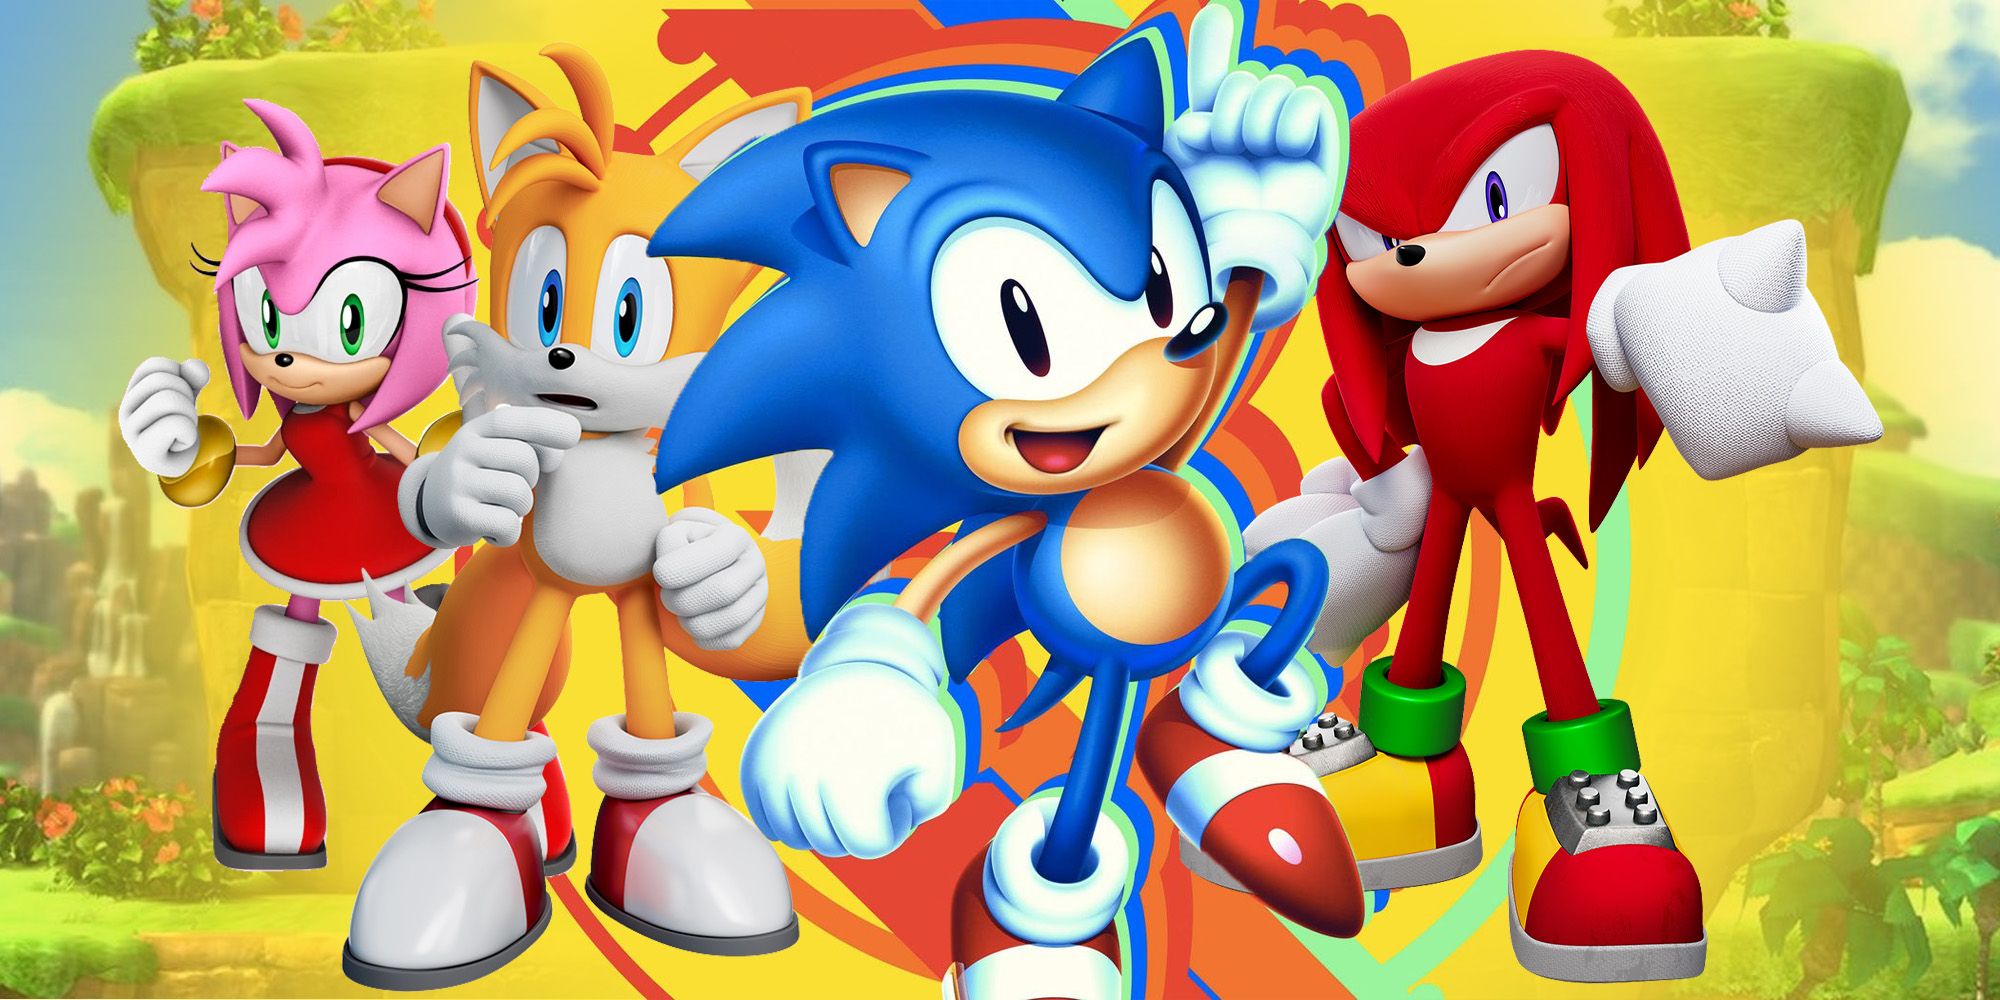 Sonic, Amy, Tails, and Knuckles from the Sonic the Hedgehog franchise.